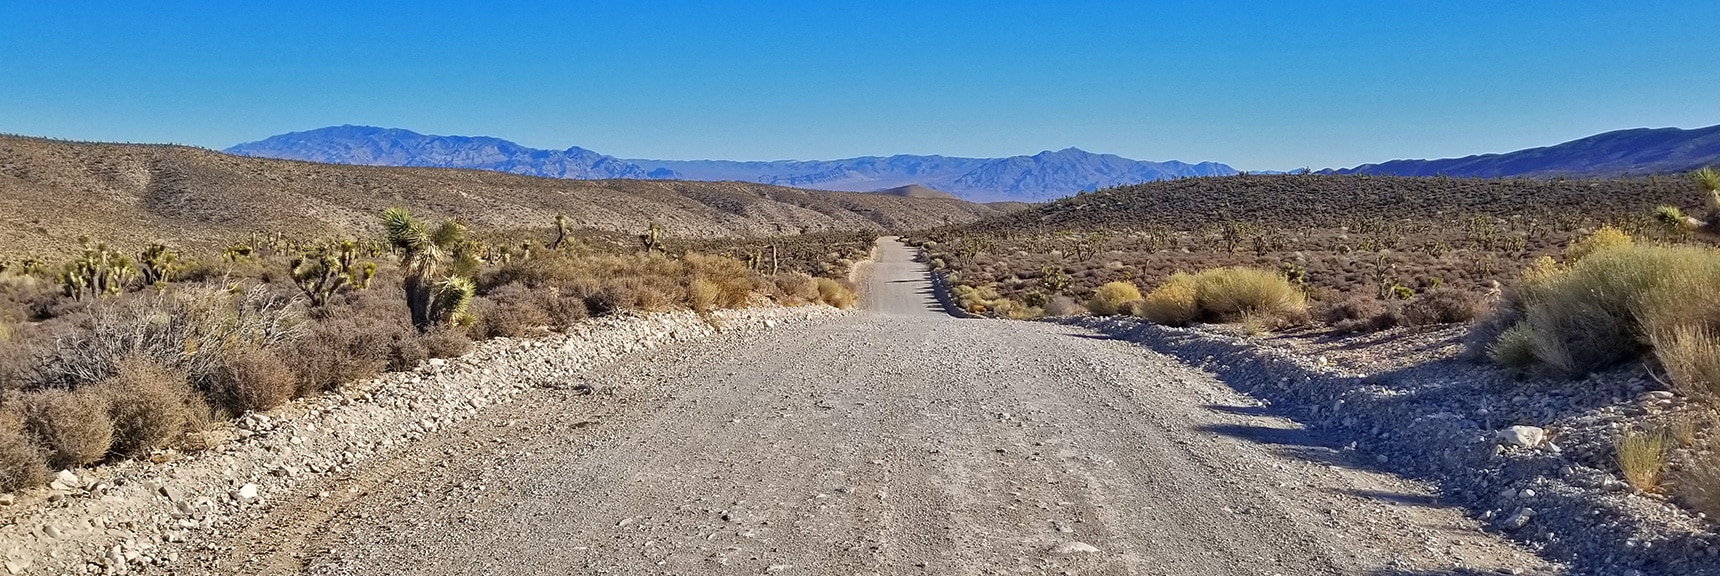 View Back Down Lower Harris Springs Rd Toward Sheep Range and Gass Peak | Harris Springs Rd, Harris Mountain Rd | Spring Mountains Wilderness, Nevada